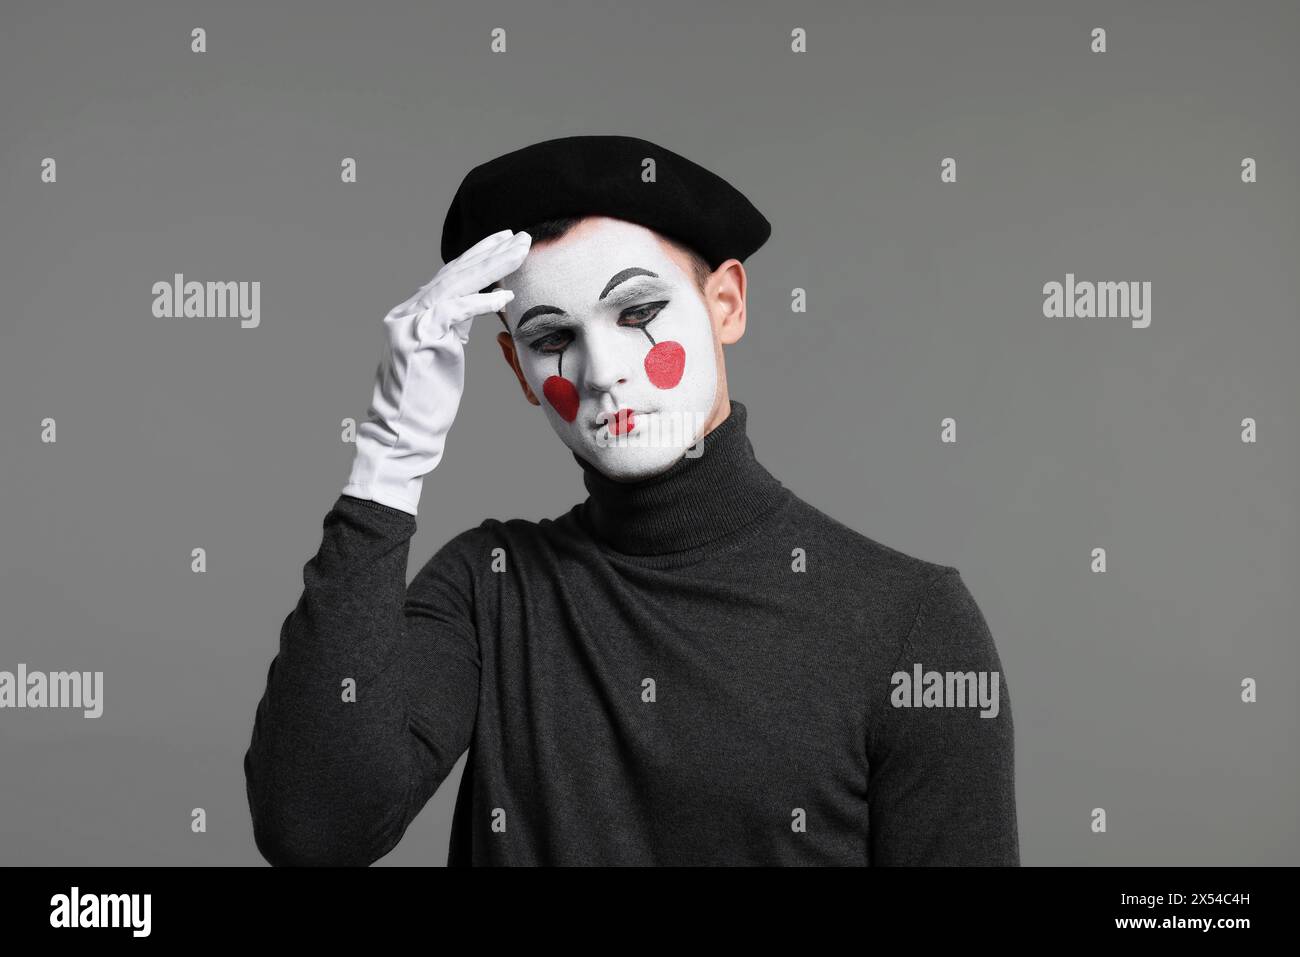 Mime artist in beret posing on grey background Stock Photo